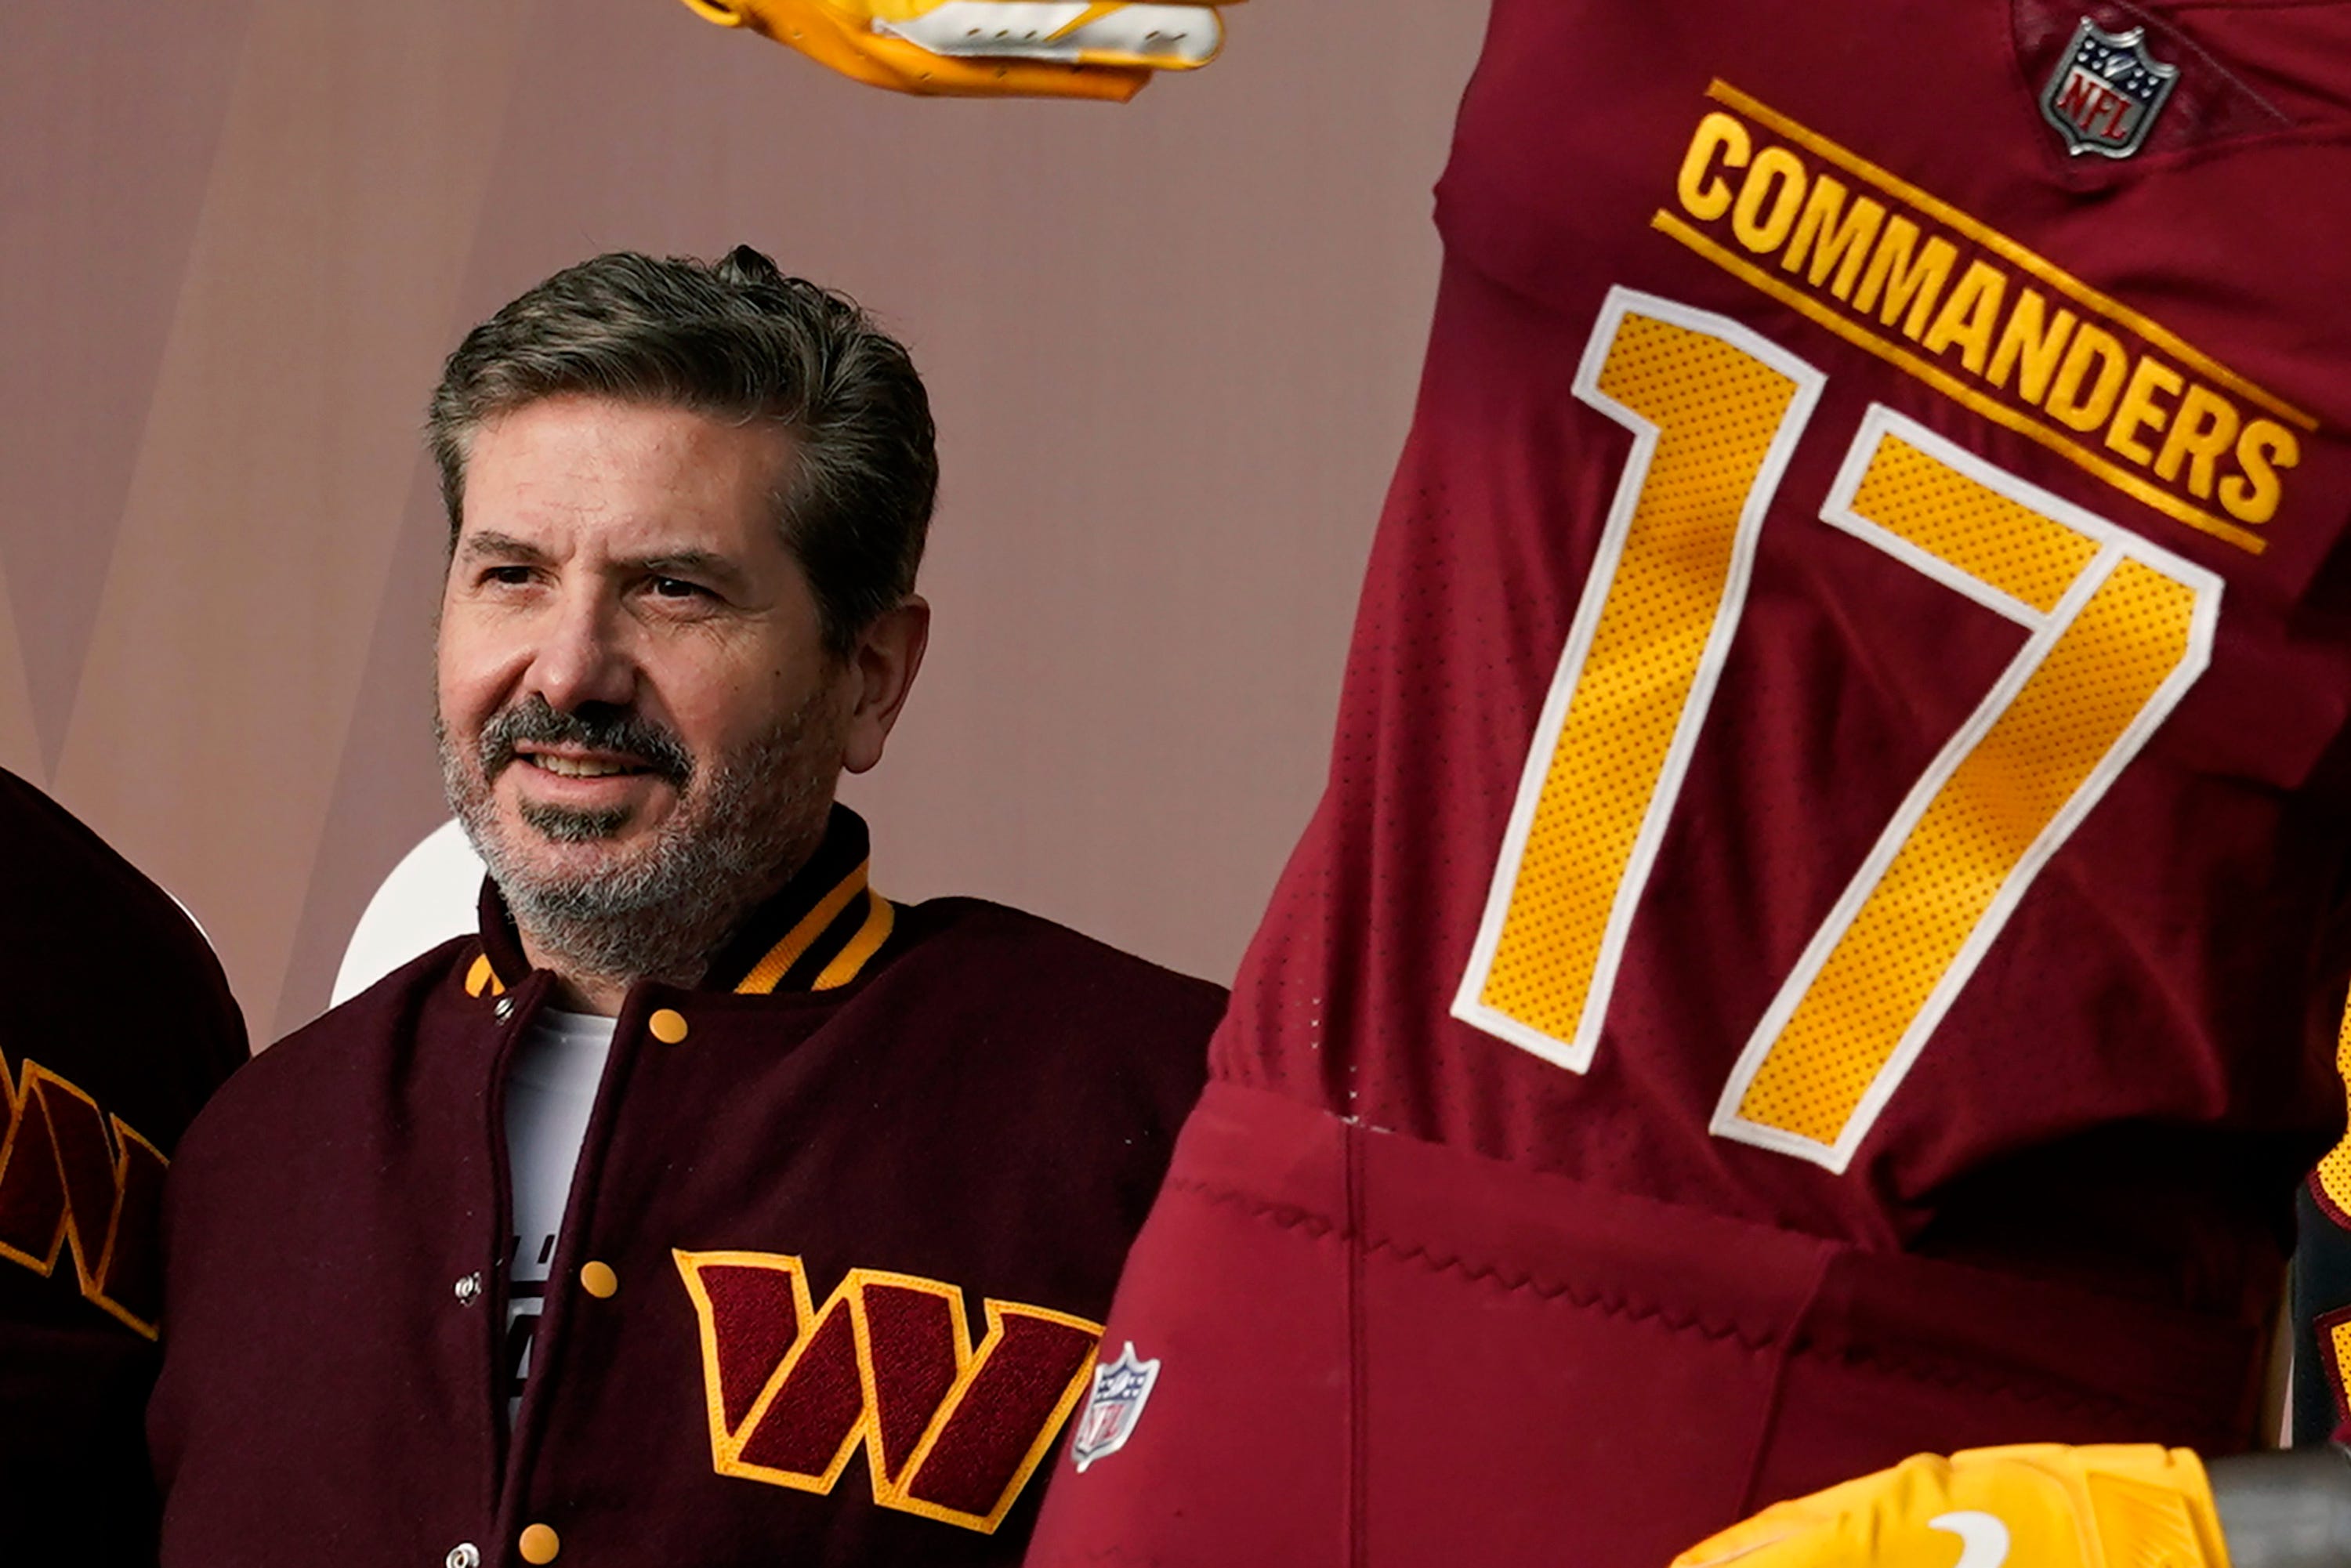 Oversight Committee hearing is no vacation for Commanders owner Daniel Snyder | Opinion